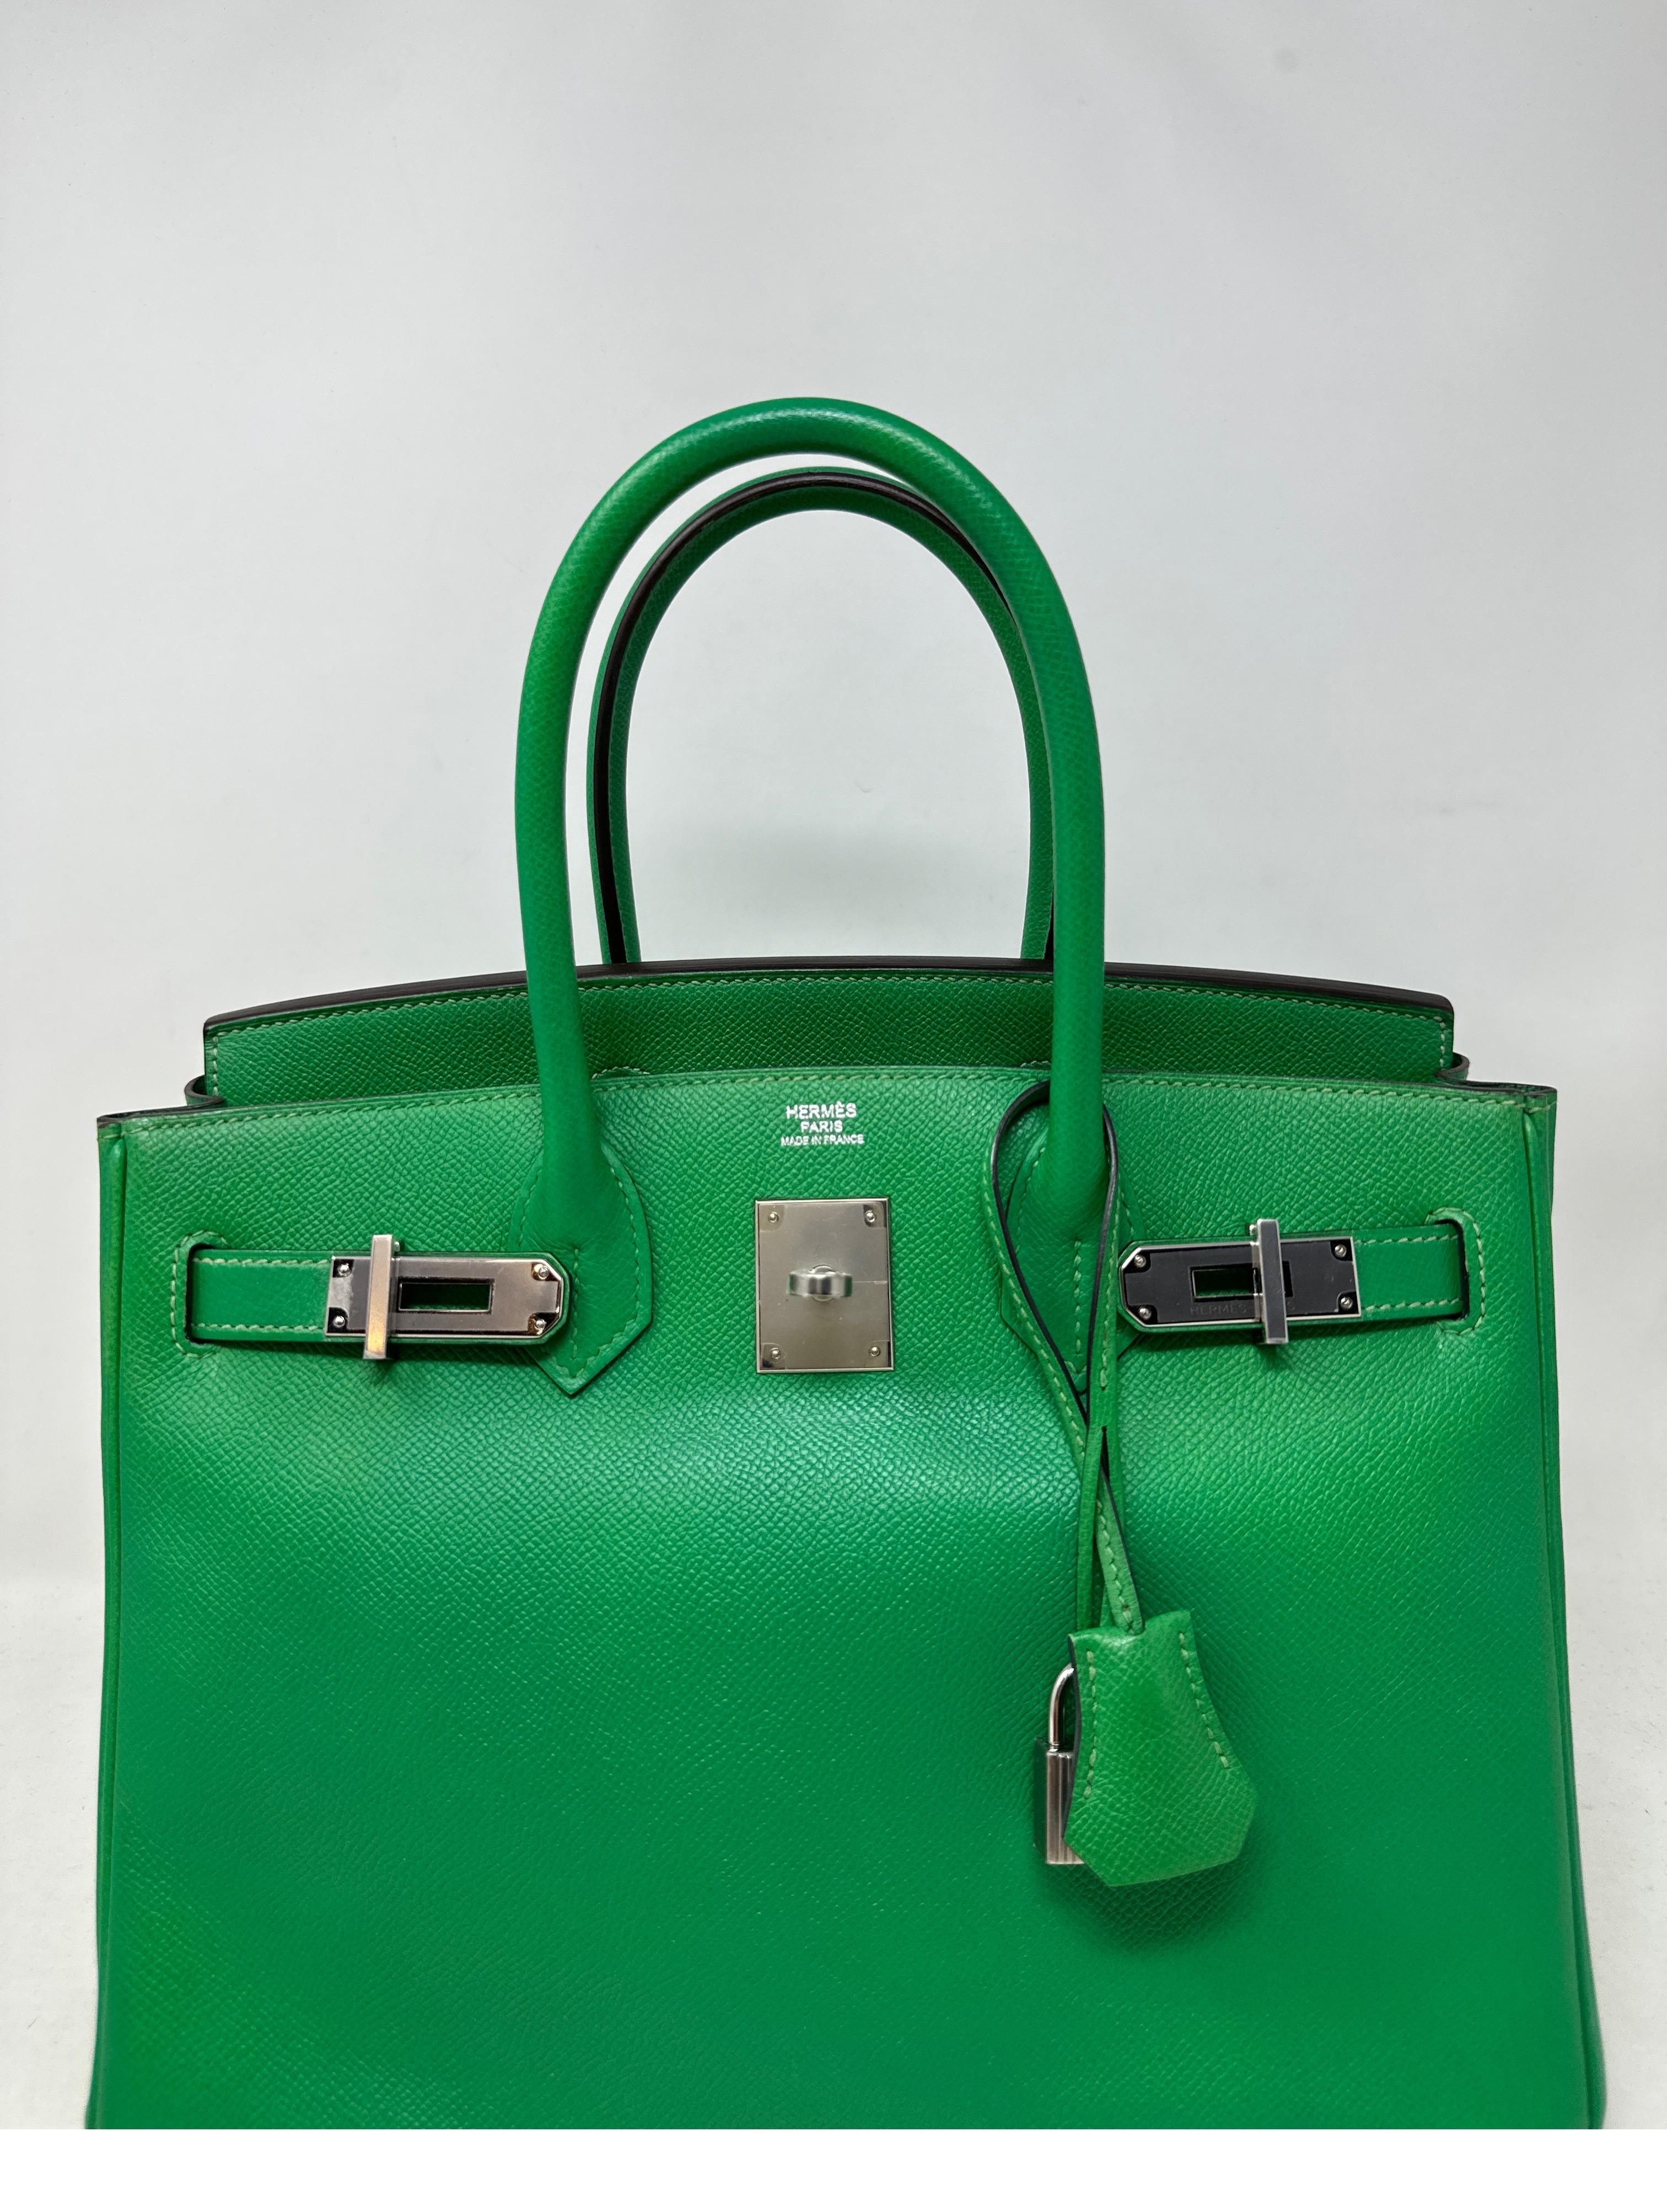 Hermes Bamboo Green Birkin 30 Bag. Excellent condition. Looks like new. Plastic still on hardware. Epsom leather. Interior clean. Most wanted size. Palladium silver hardware. Includes clochette, lock, keys, and dust bag. Guaranteed authentic. 